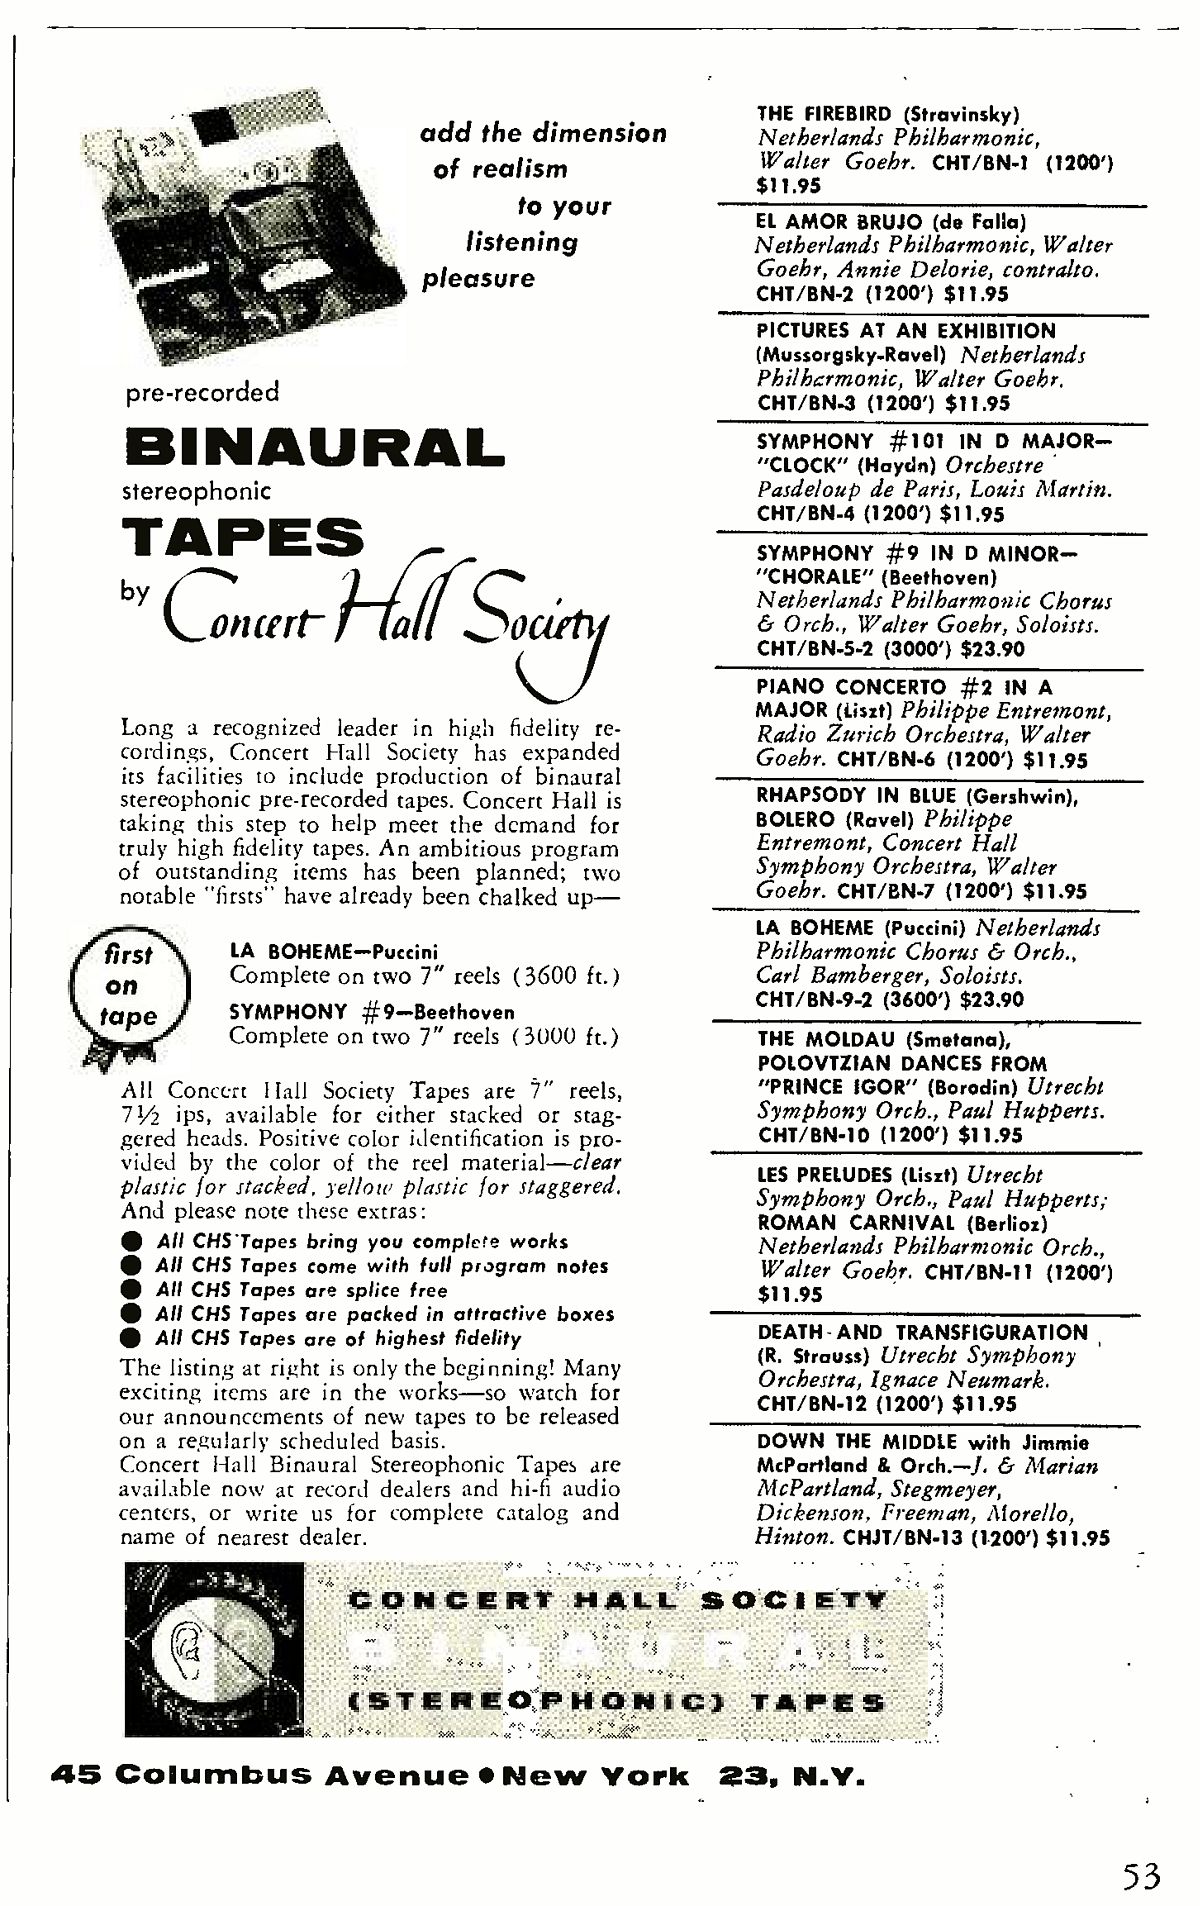 ConcertHall BinauralTapes 1956